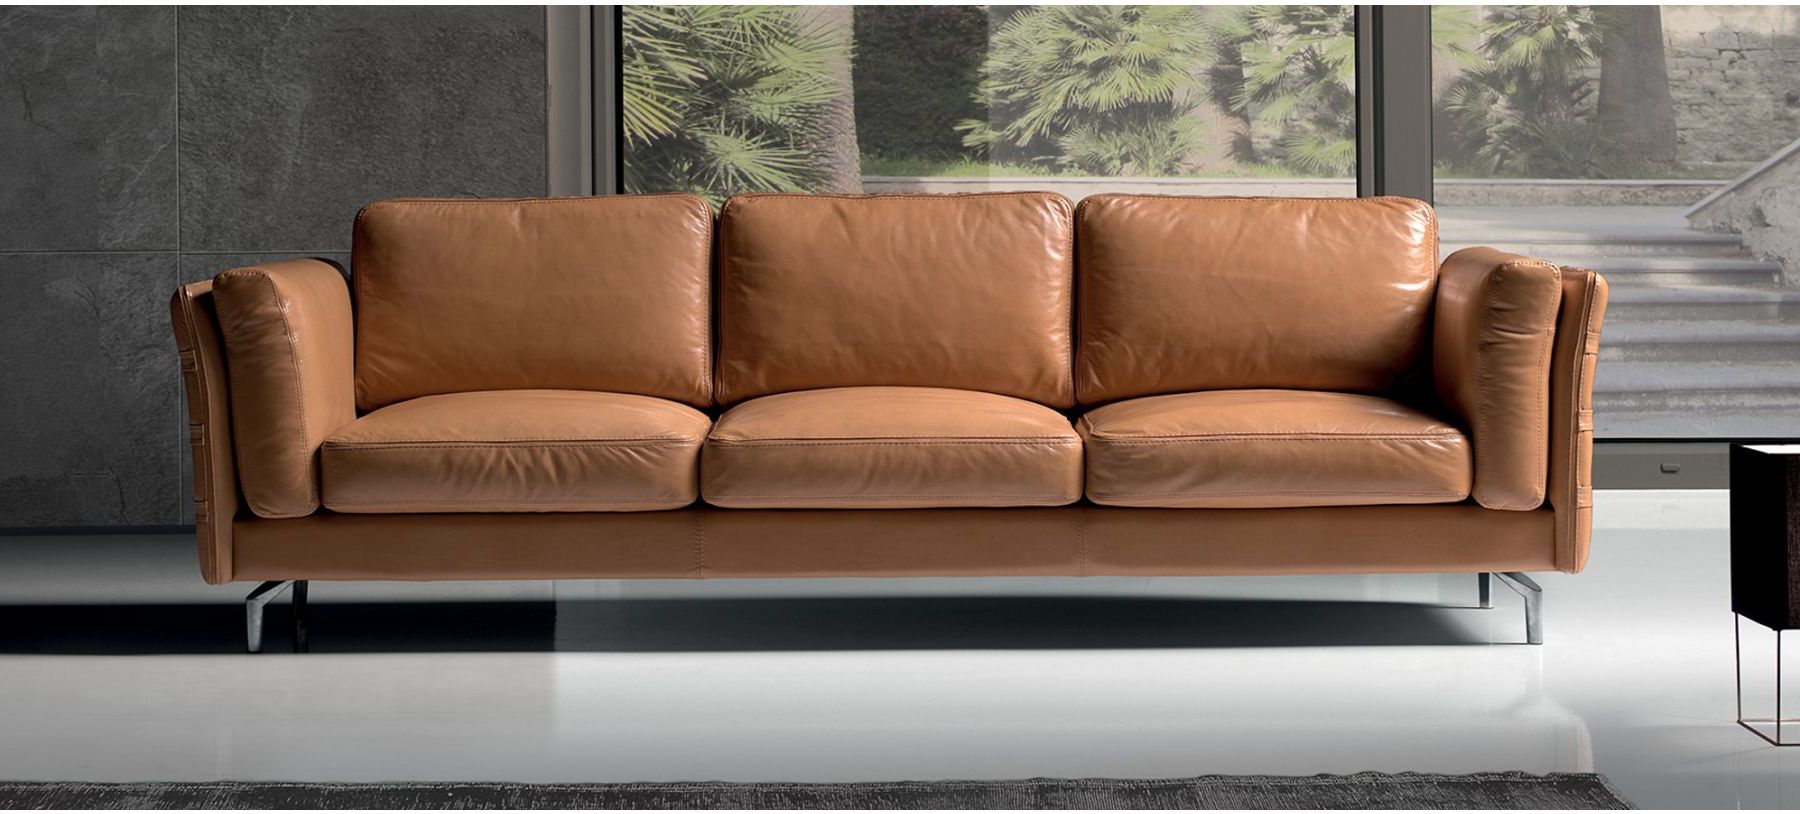 Jenny Leather Tan 3 + 2 Sofa Set With Chrome Legs Newtrend Available In A  Range Of Leathers And Colours 10 Yr Frame 10 Yr Pocket Sprung 5 Yr Foam  Warranty | Leather Sofa World Intended For Chrome Metal Legs Sofas (View 13 of 20)